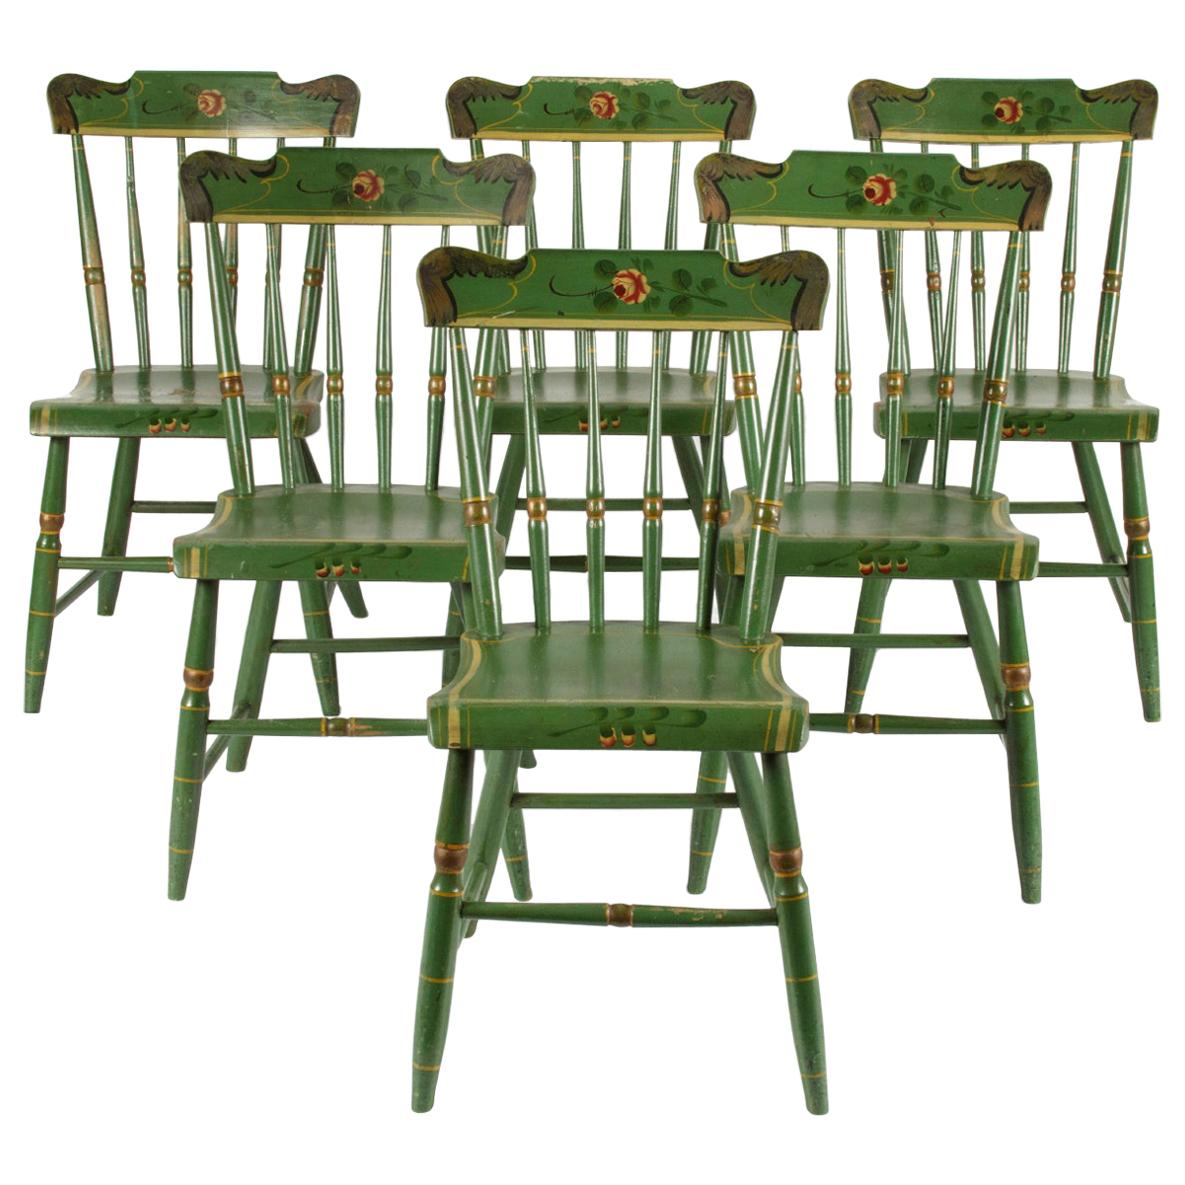 Set of 6 Green Plank-Seaded Spindle-Back Chairs with Rose Decoration